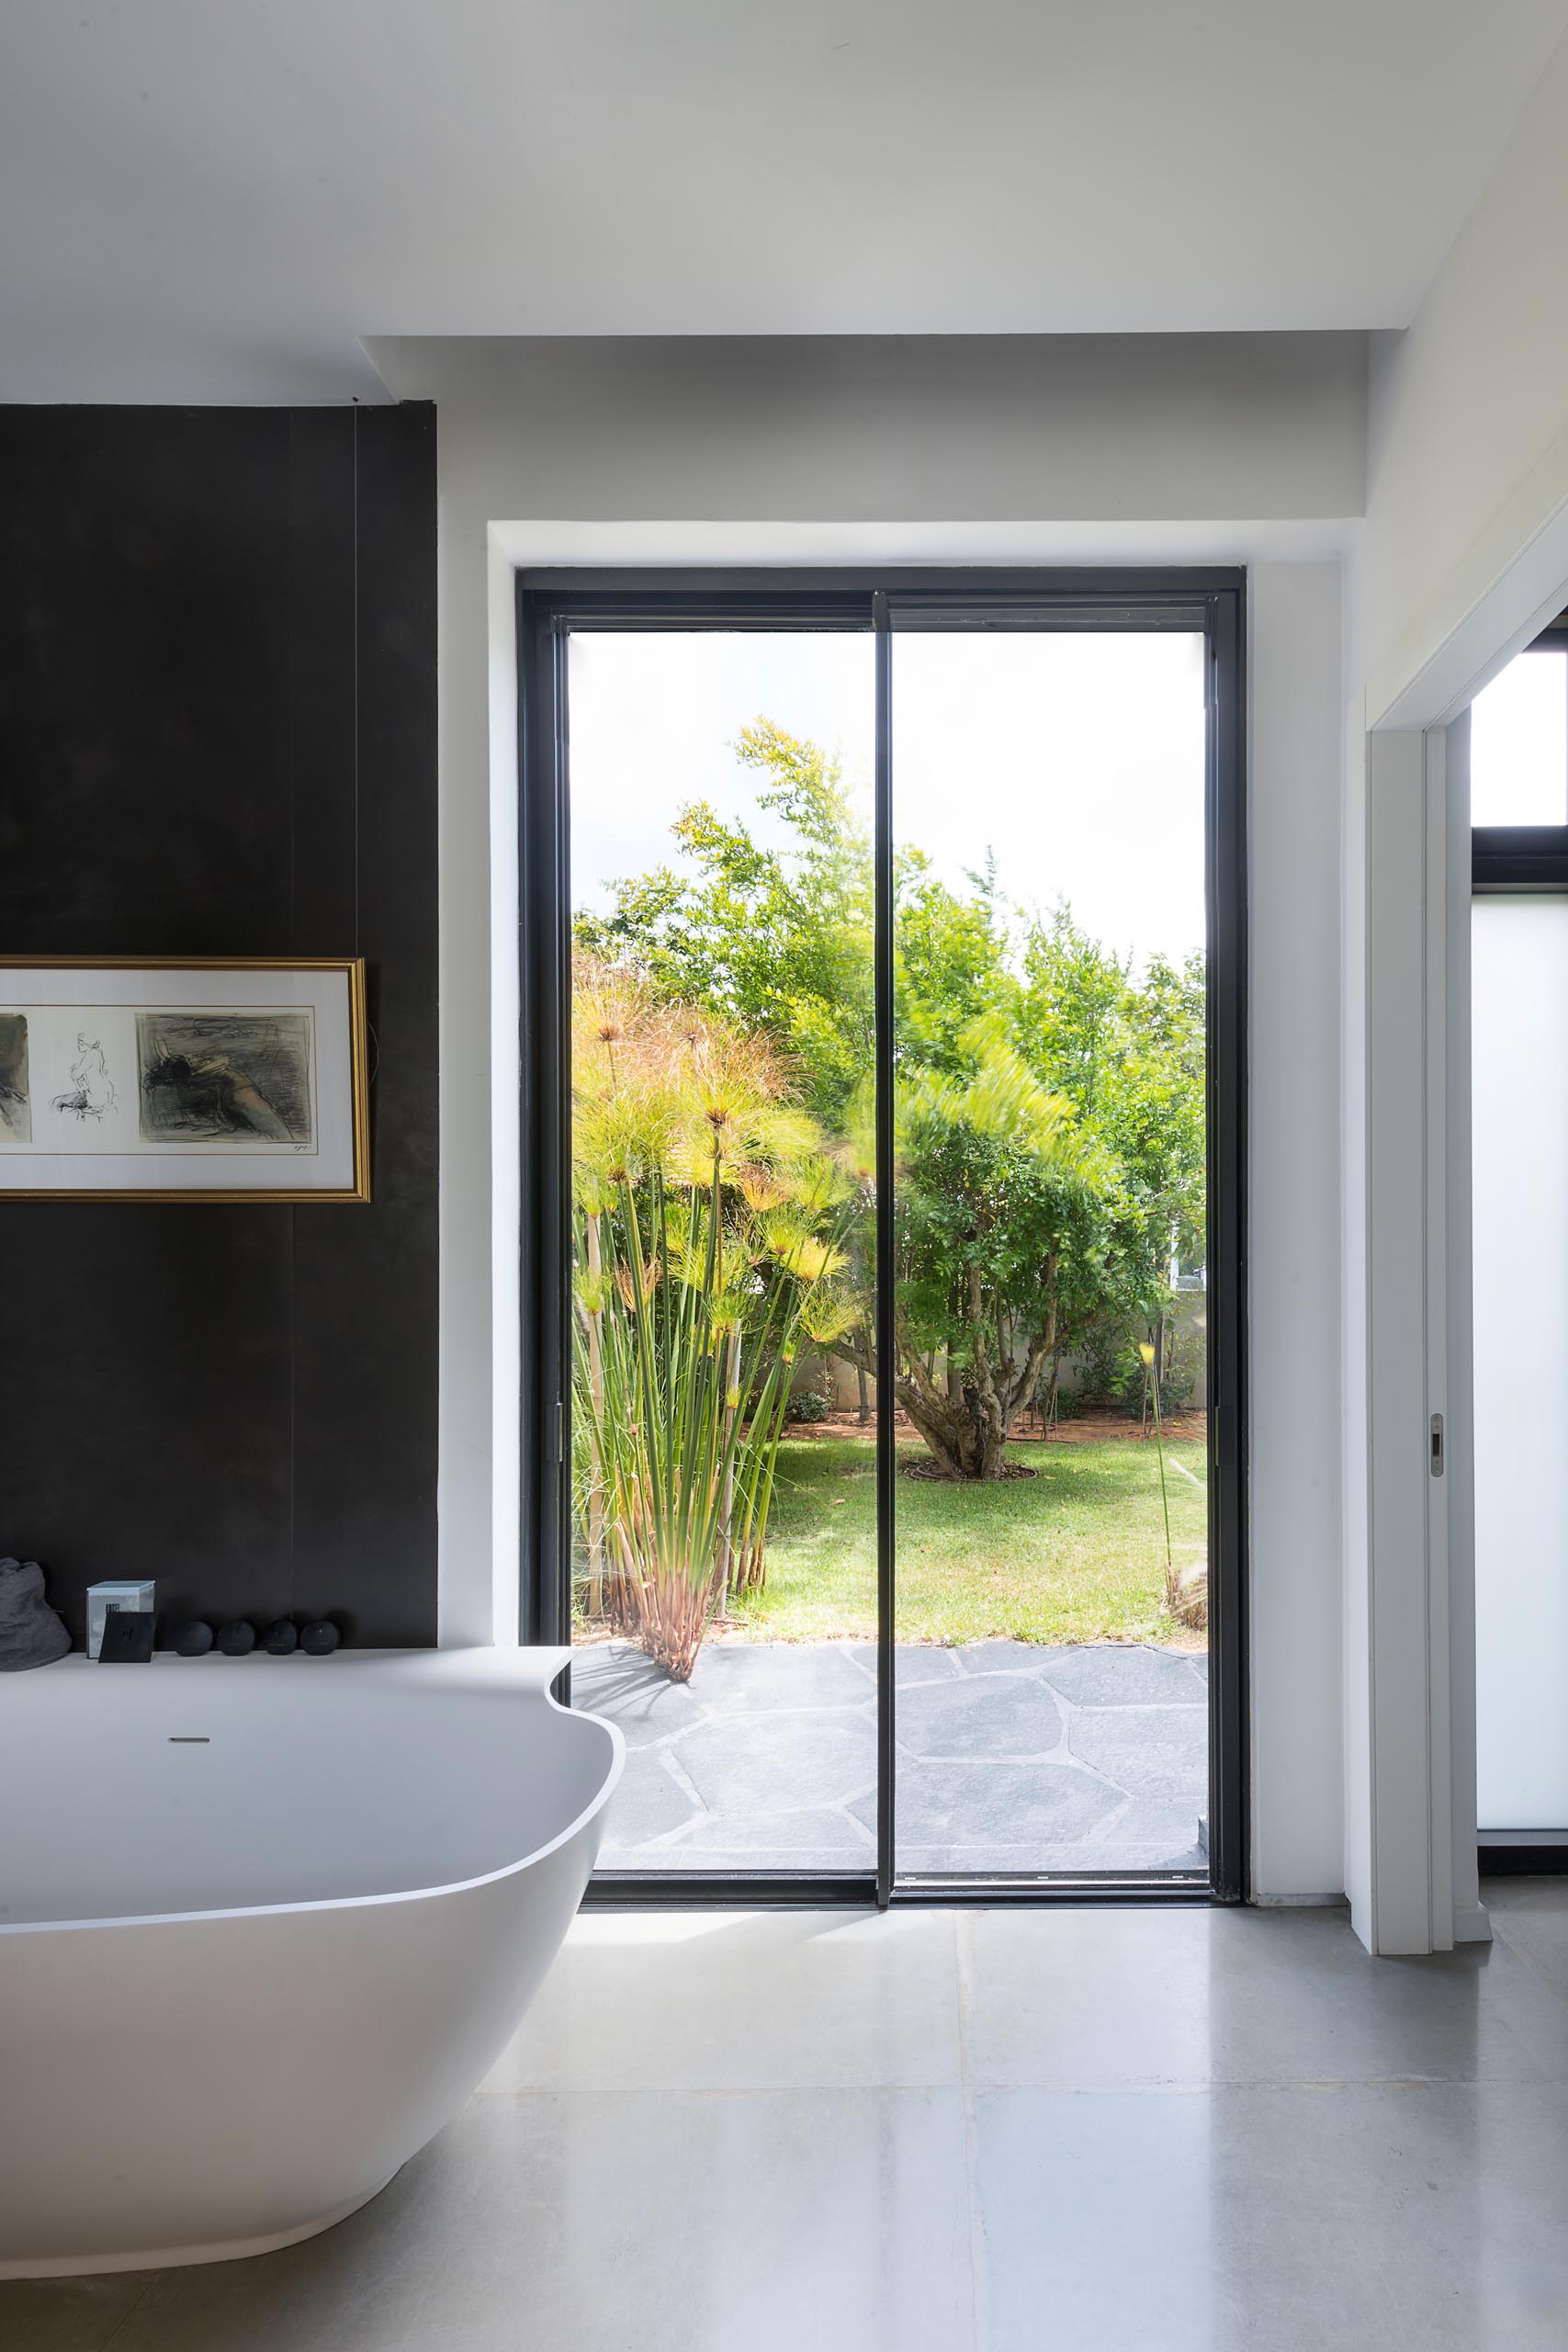 A modern en-suite bathroom with a freestanding bathtub, a black accent wall, and a glass-enclosed shower.